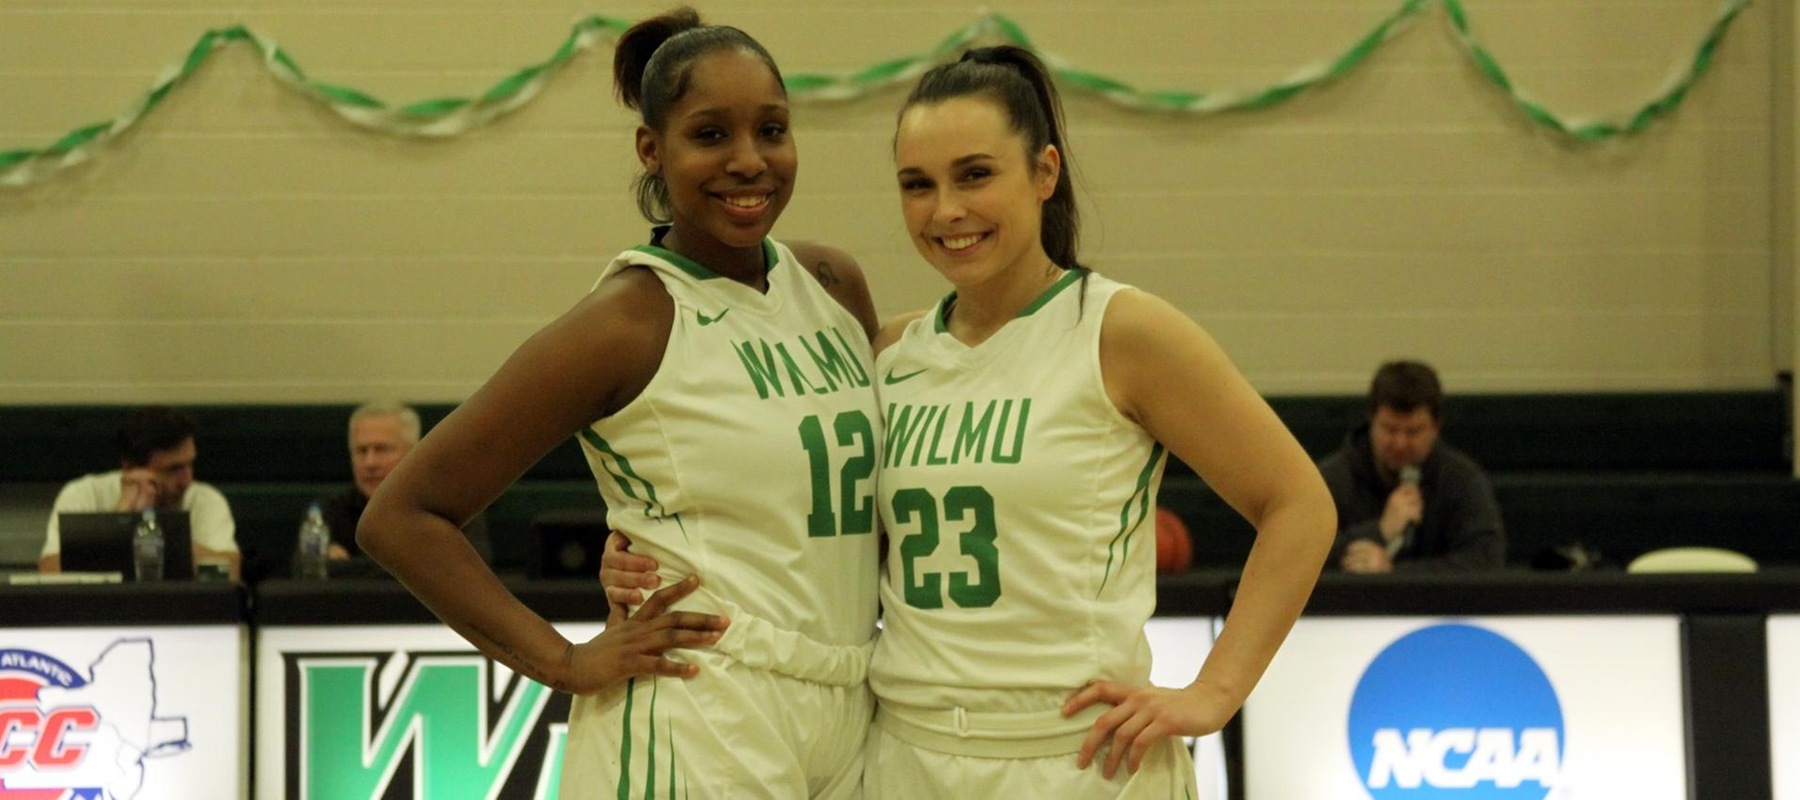 Copyright 2019; Wilmington University. All rights reserved. Photo of Nyree Grant and Macy Robinson on Senior Night. Photo by Samantha Kelley. February 27, 2019 vs. Holy Family.